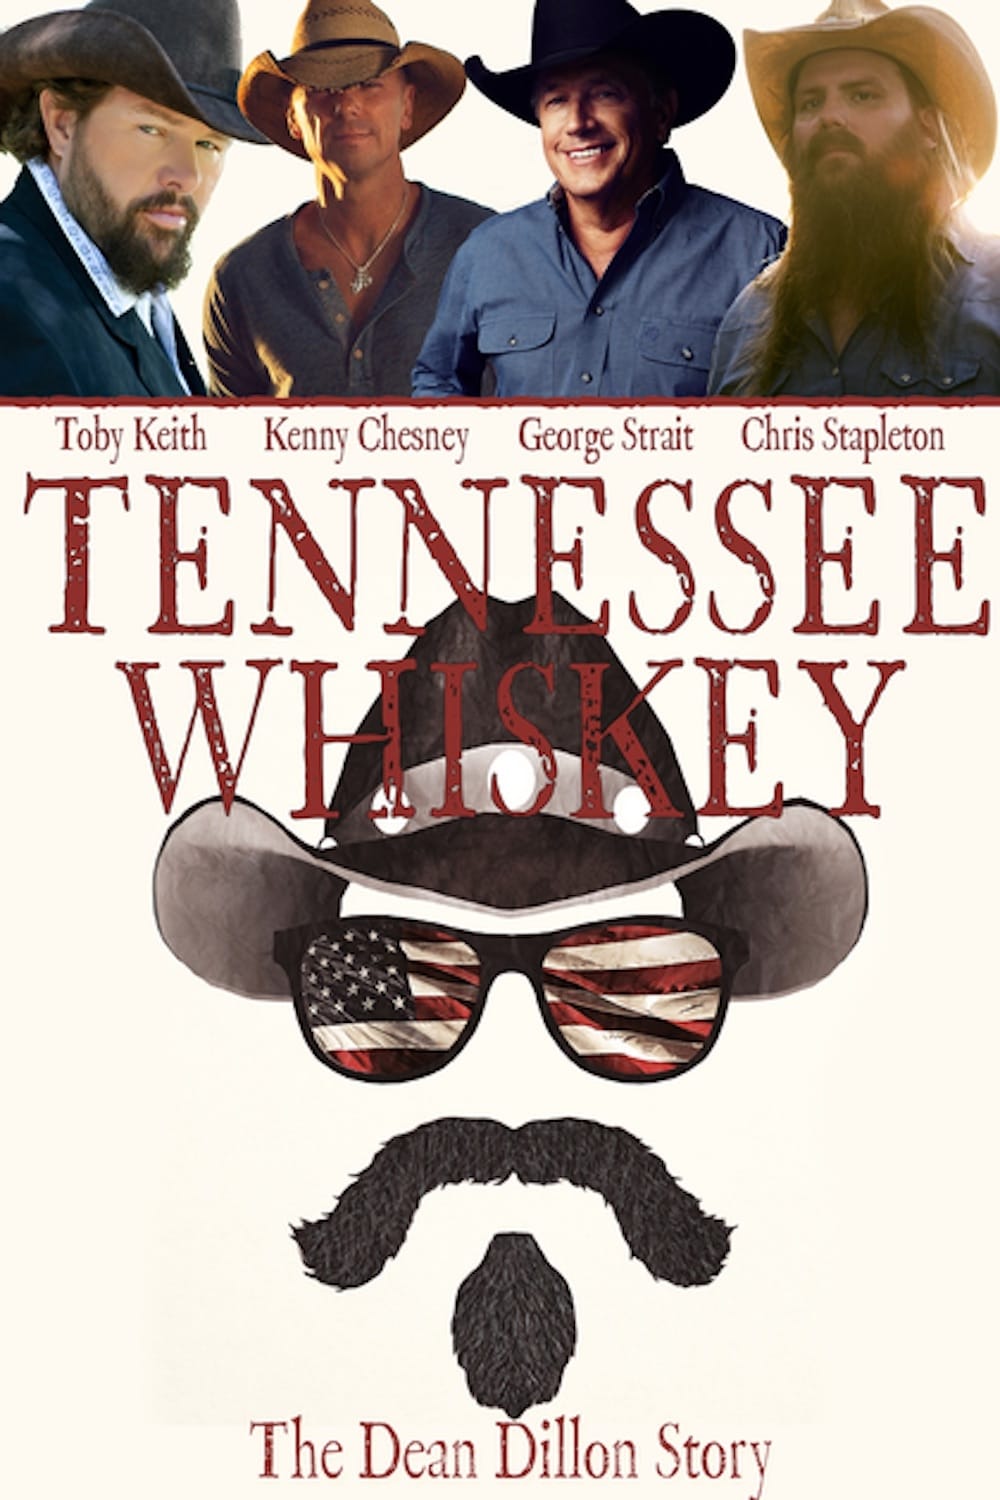 Tennessee Whiskey: The Dean Dillon Story